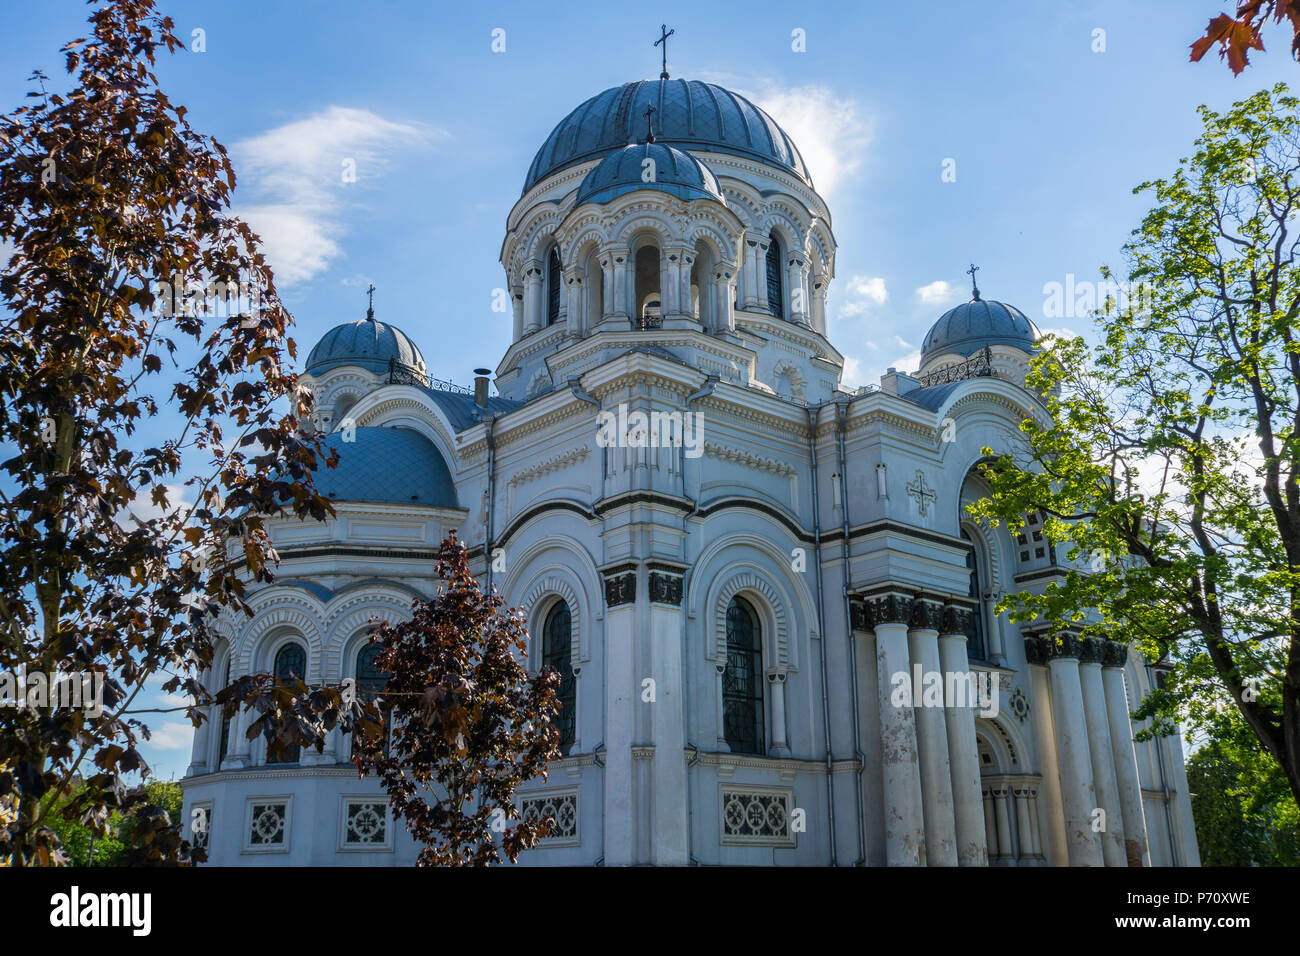 Lithuania, Side view between trees on ancient Sankt Michael the Archangel Church in Kaunas Stock Photo